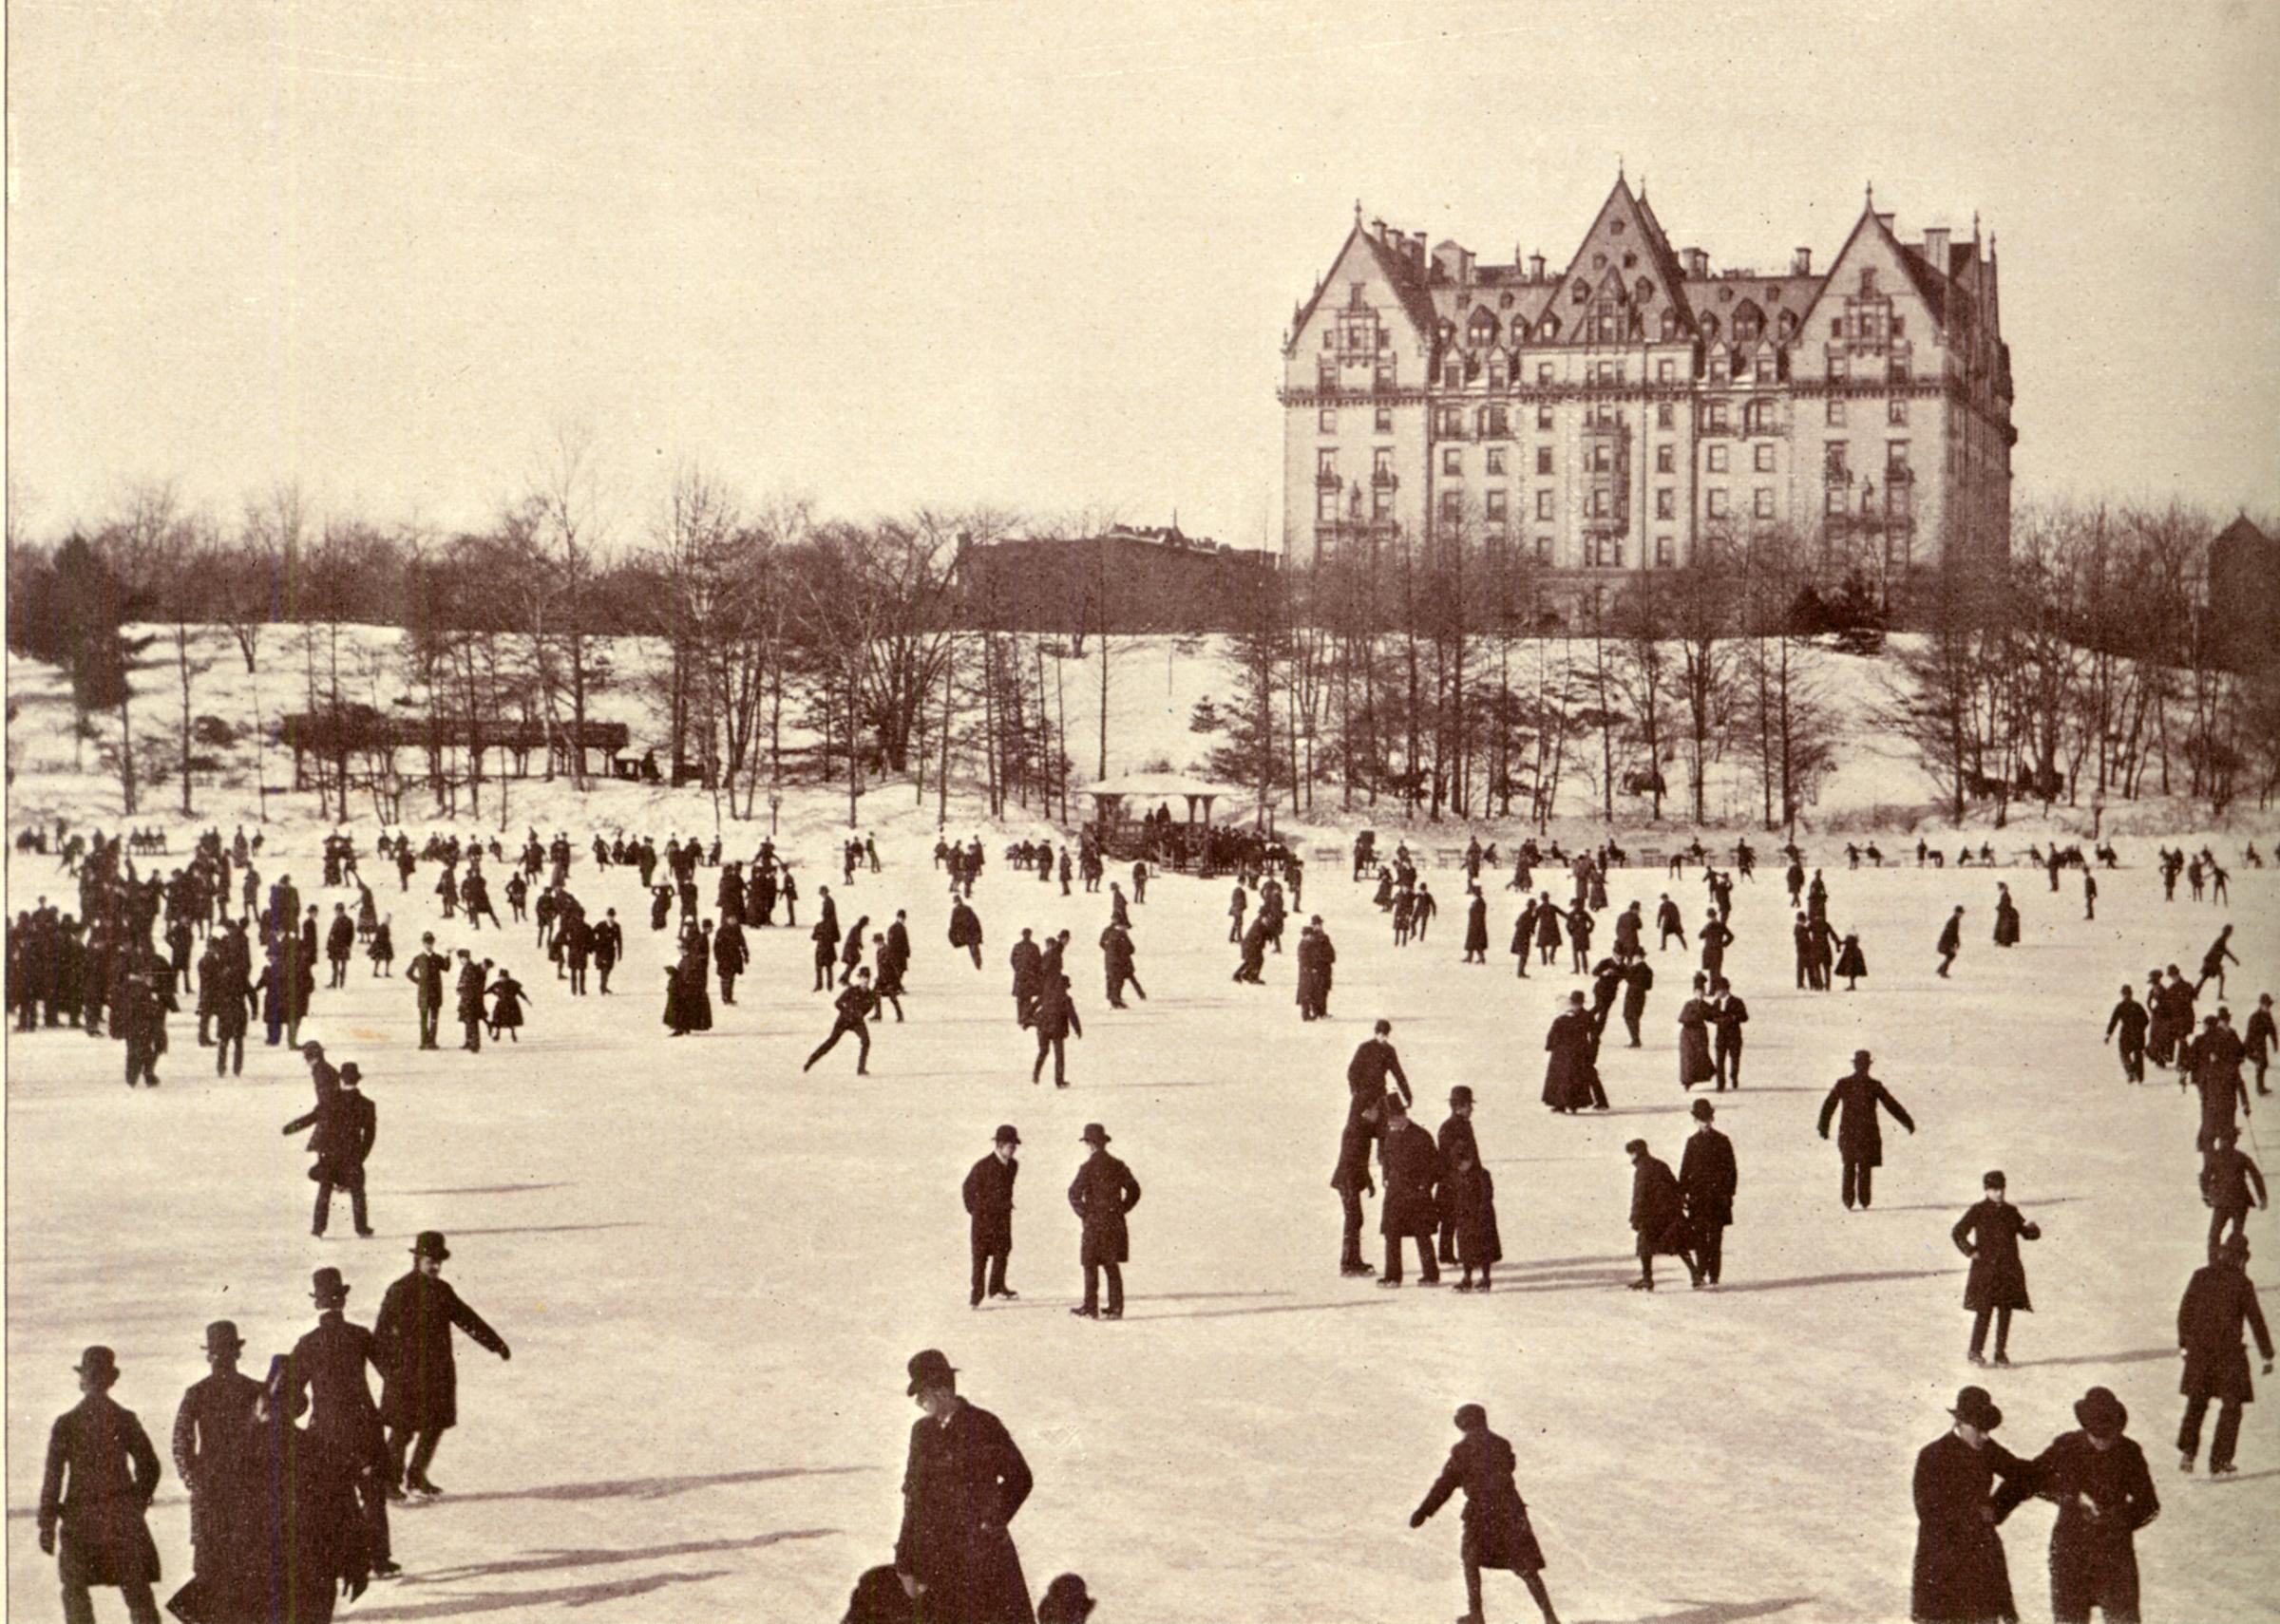 A colored flag would signal that the ice was thick enough to permit skating on the lake. The Dakota dominated the scene.